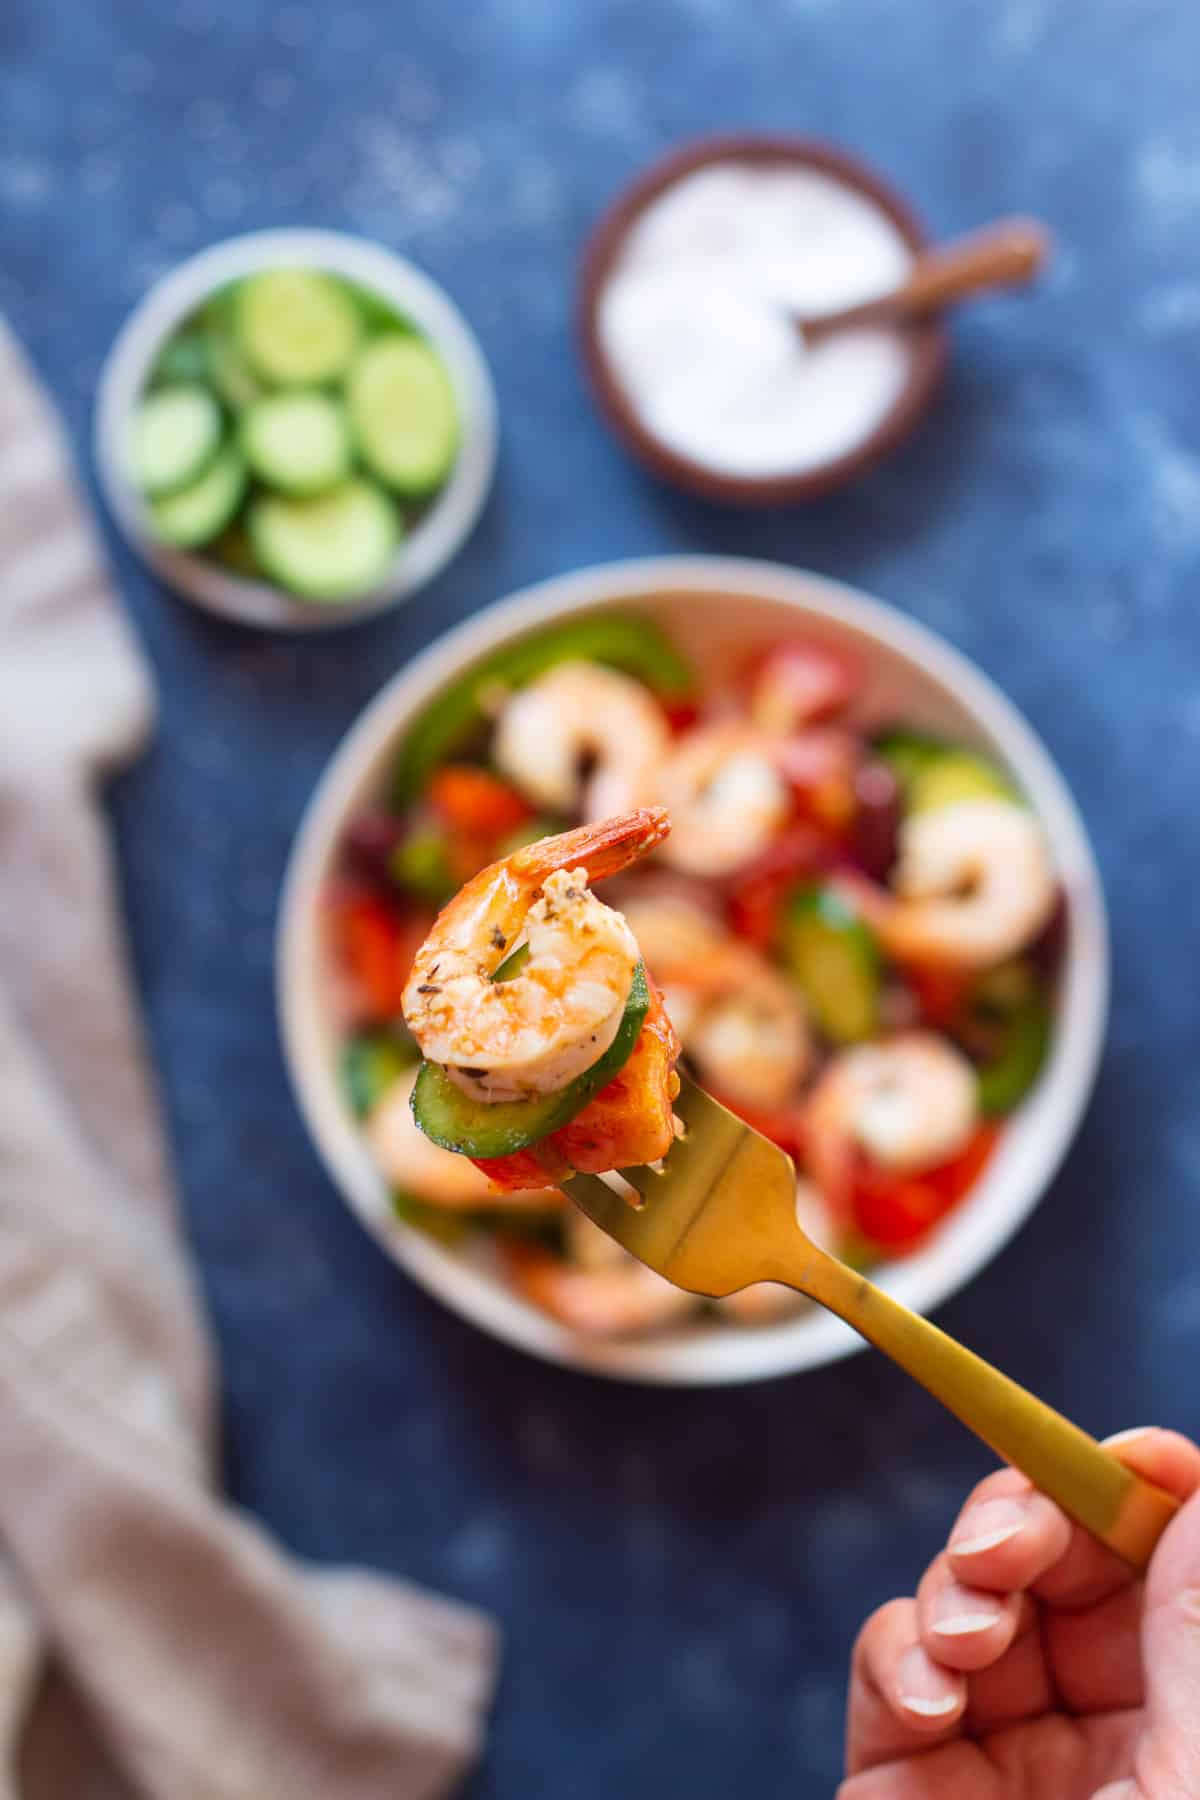 Healthy salad made with shrimp and vegetables.